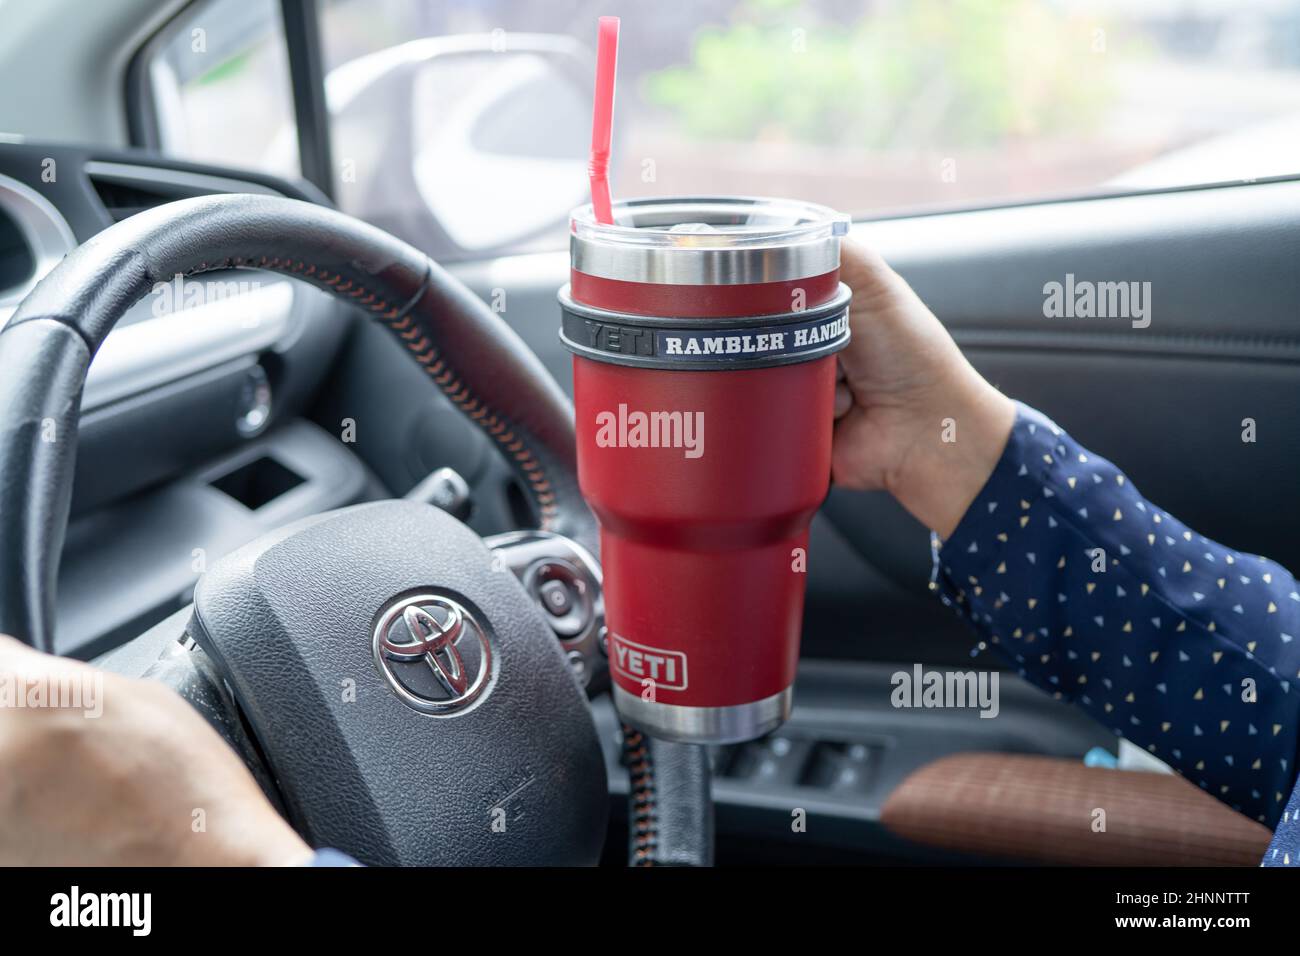 Bangkok, Thailand, July 1, 2021 Asian lady holding ice coffee in Yeti mug cup in toyota car, dangerous and risk an accident. Stock Photo